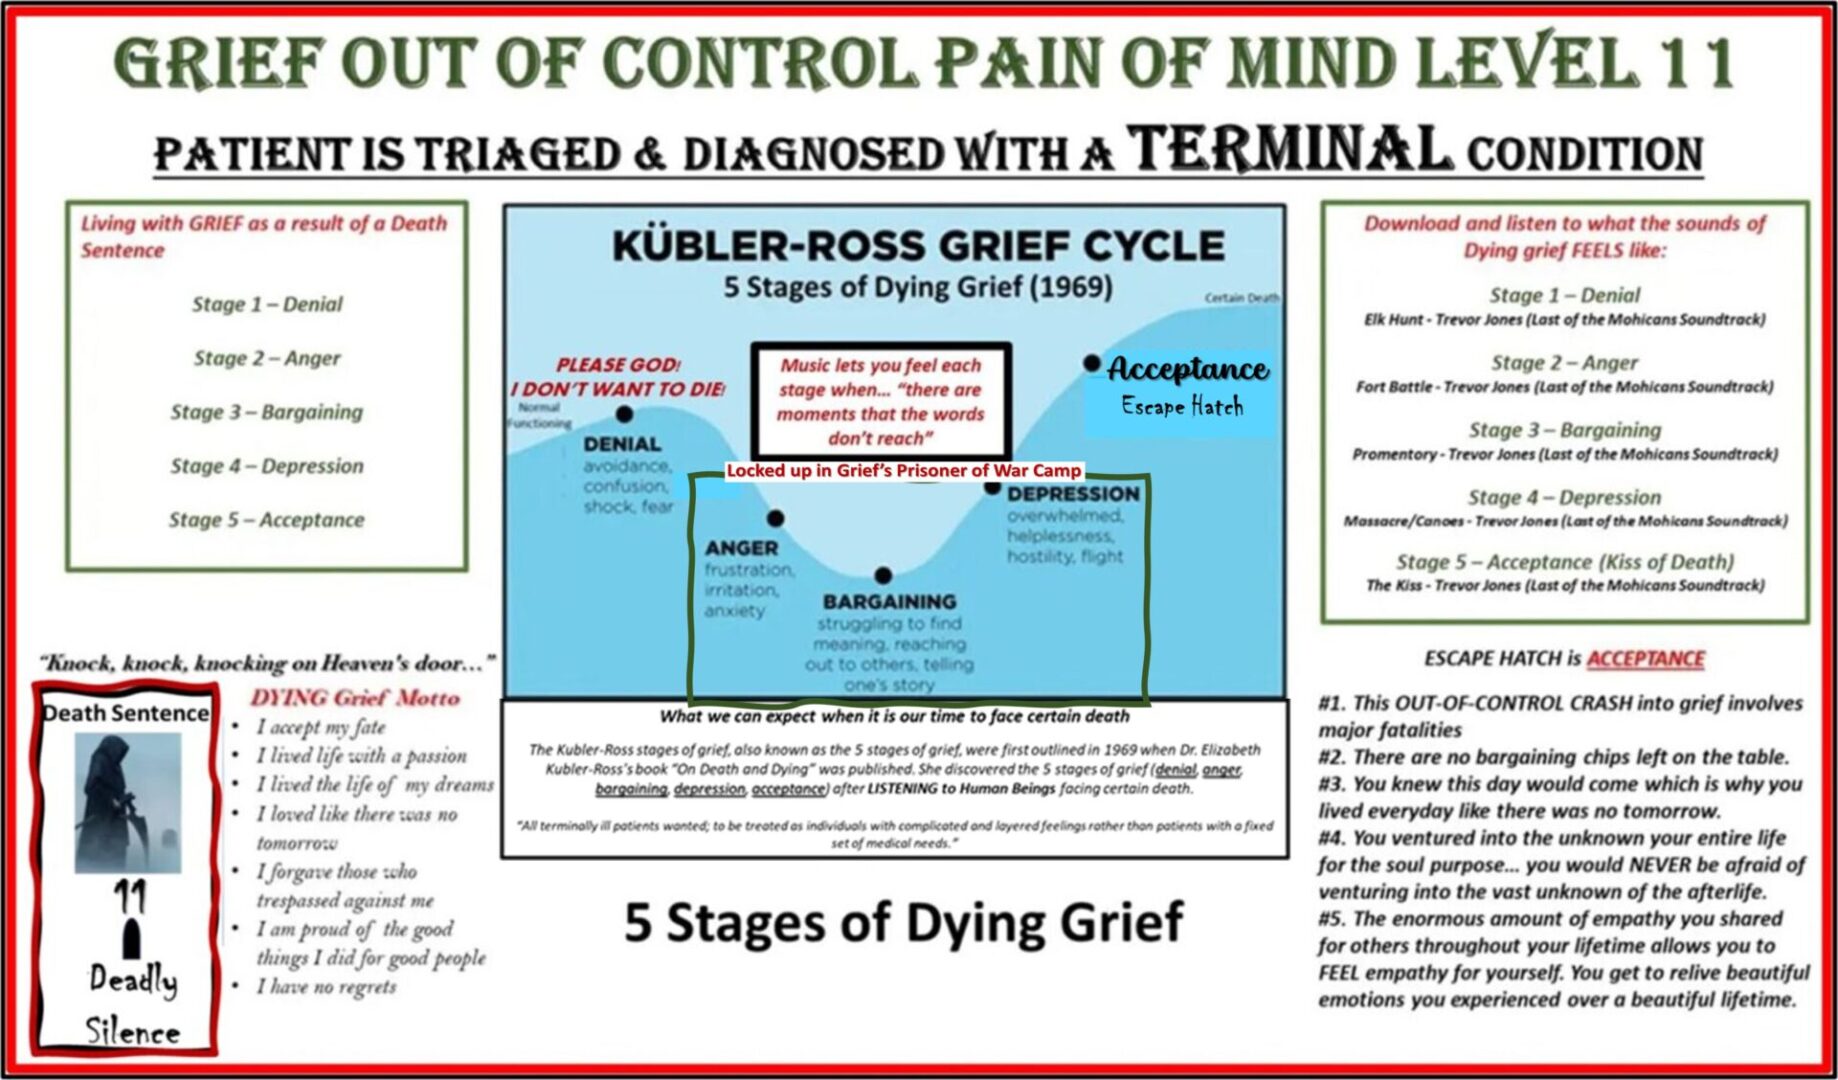 Level 11 - The 5 Stages of Death & Dying Grief (Dr. Kubler-Ross)